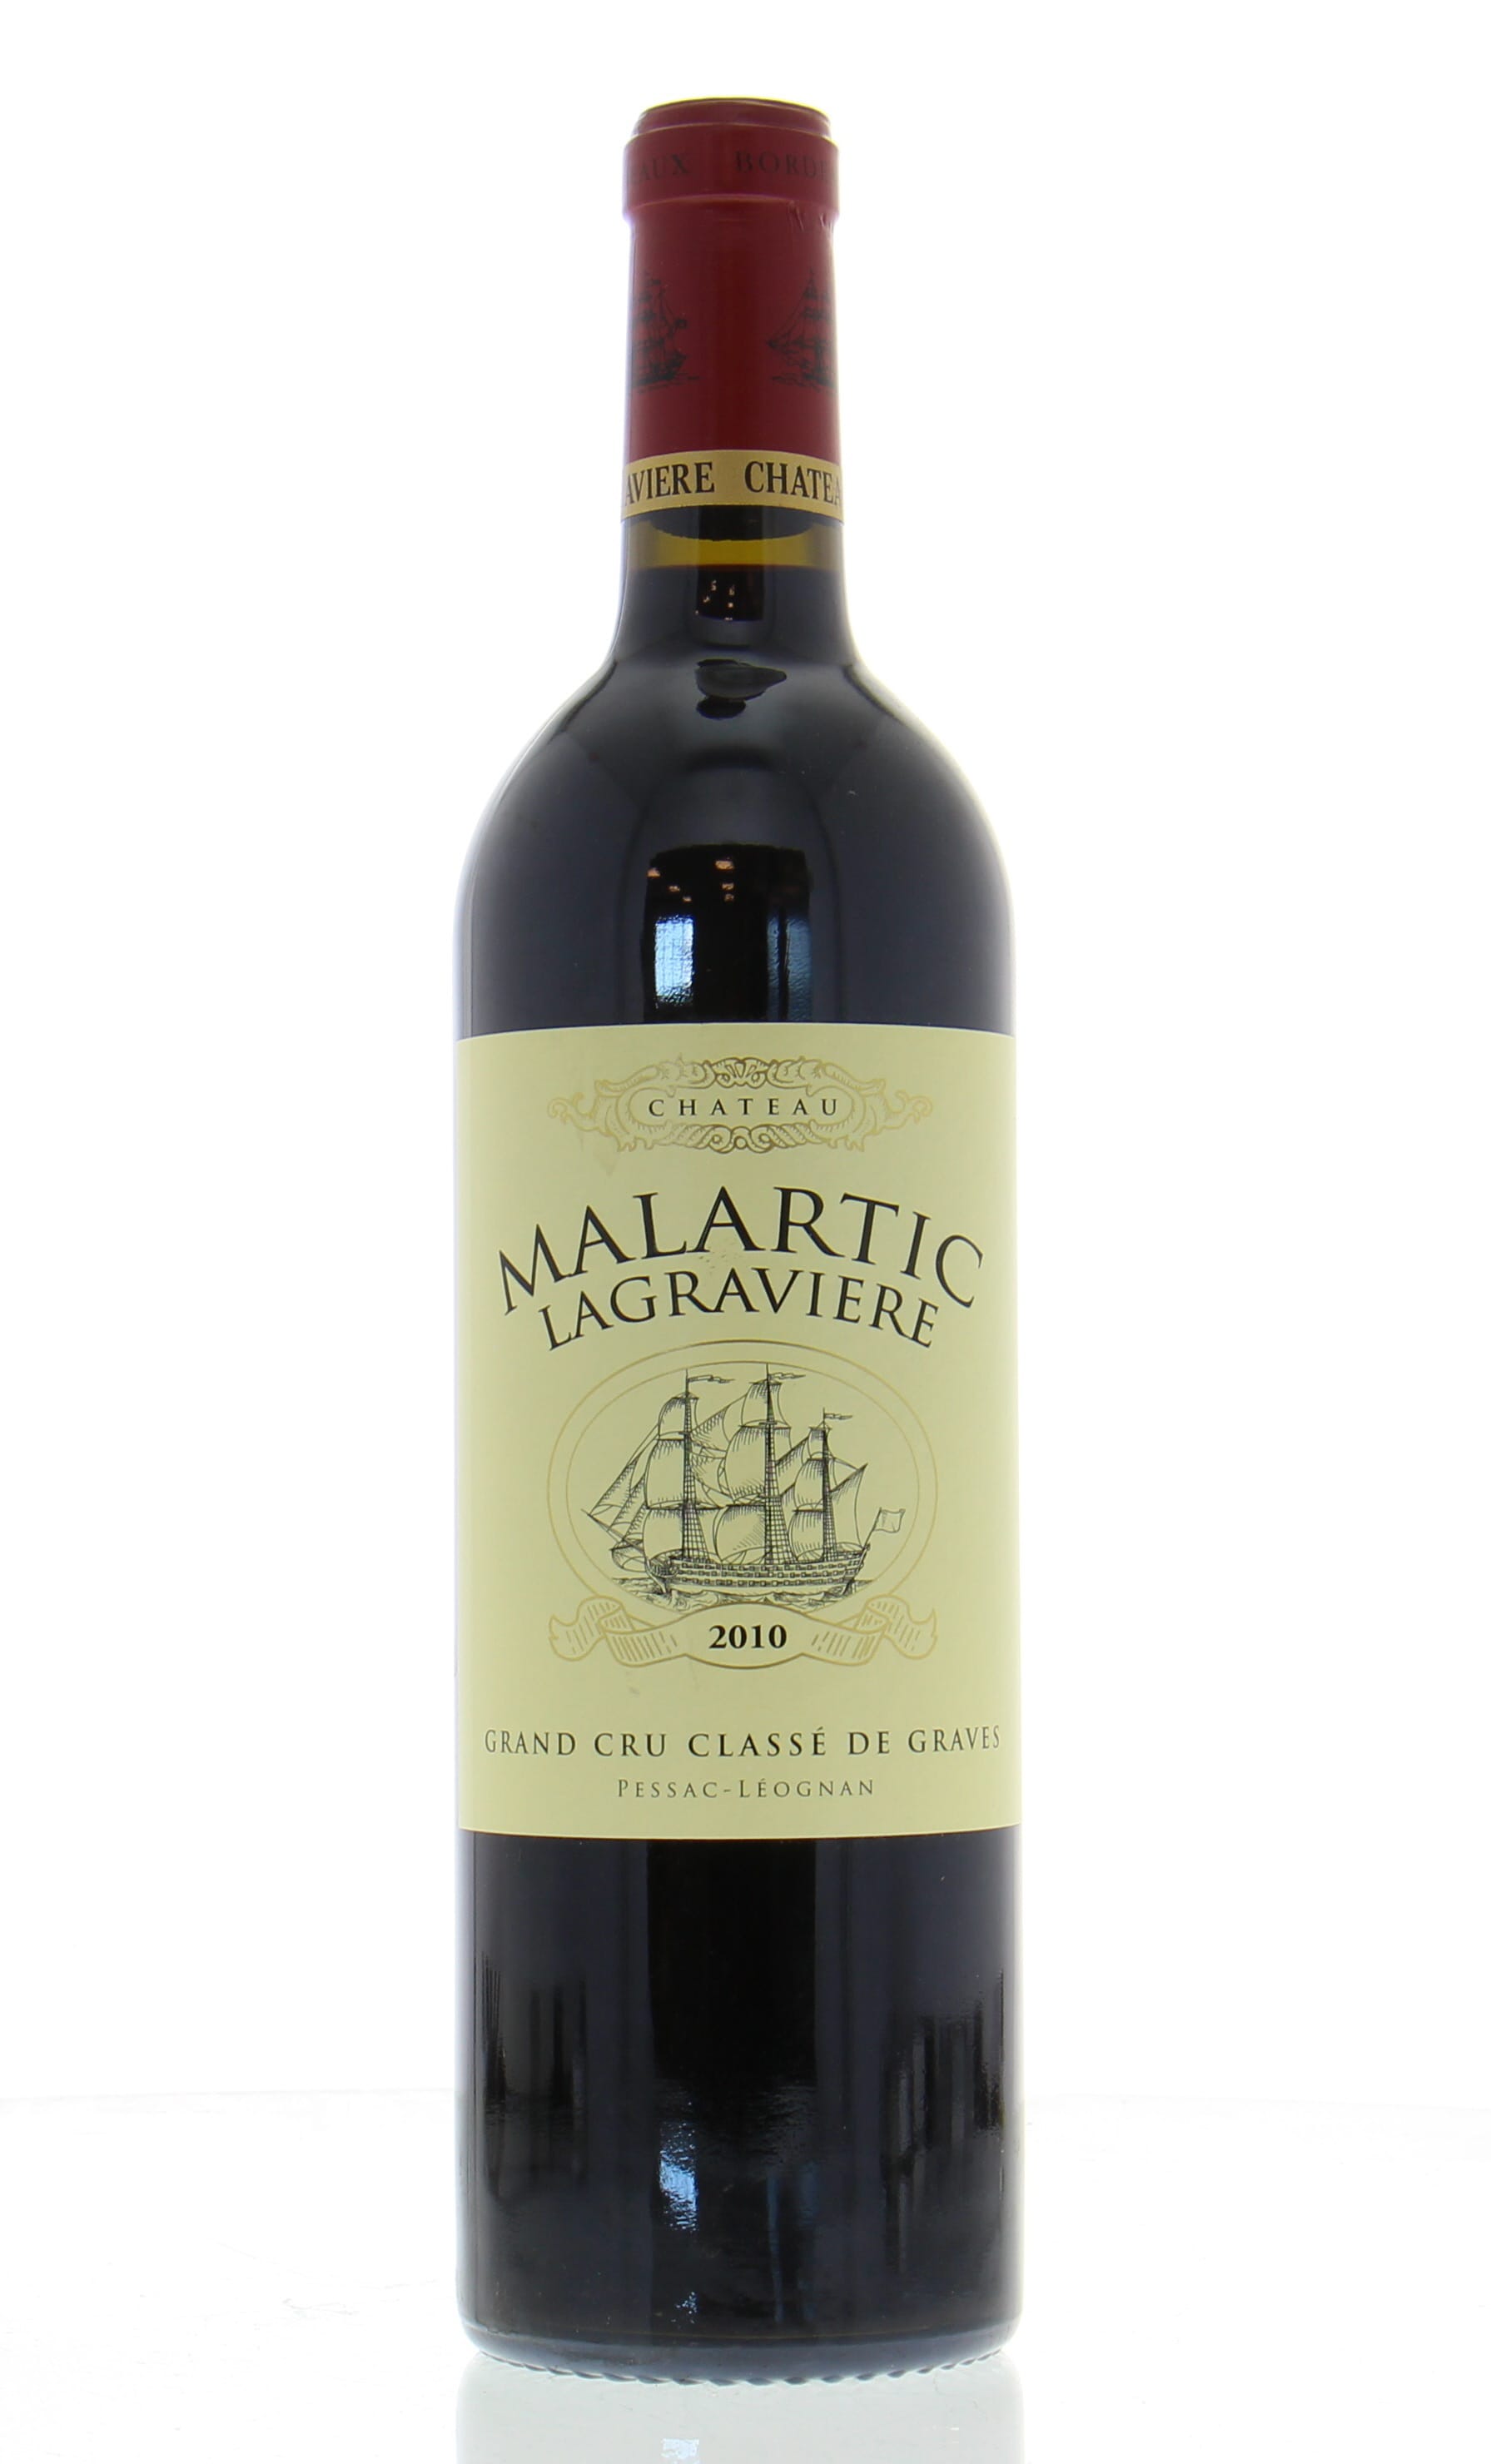 Chateau Malartic-Lagraviere - Chateau Malartic-Lagraviere 2010 From Original Wooden Case